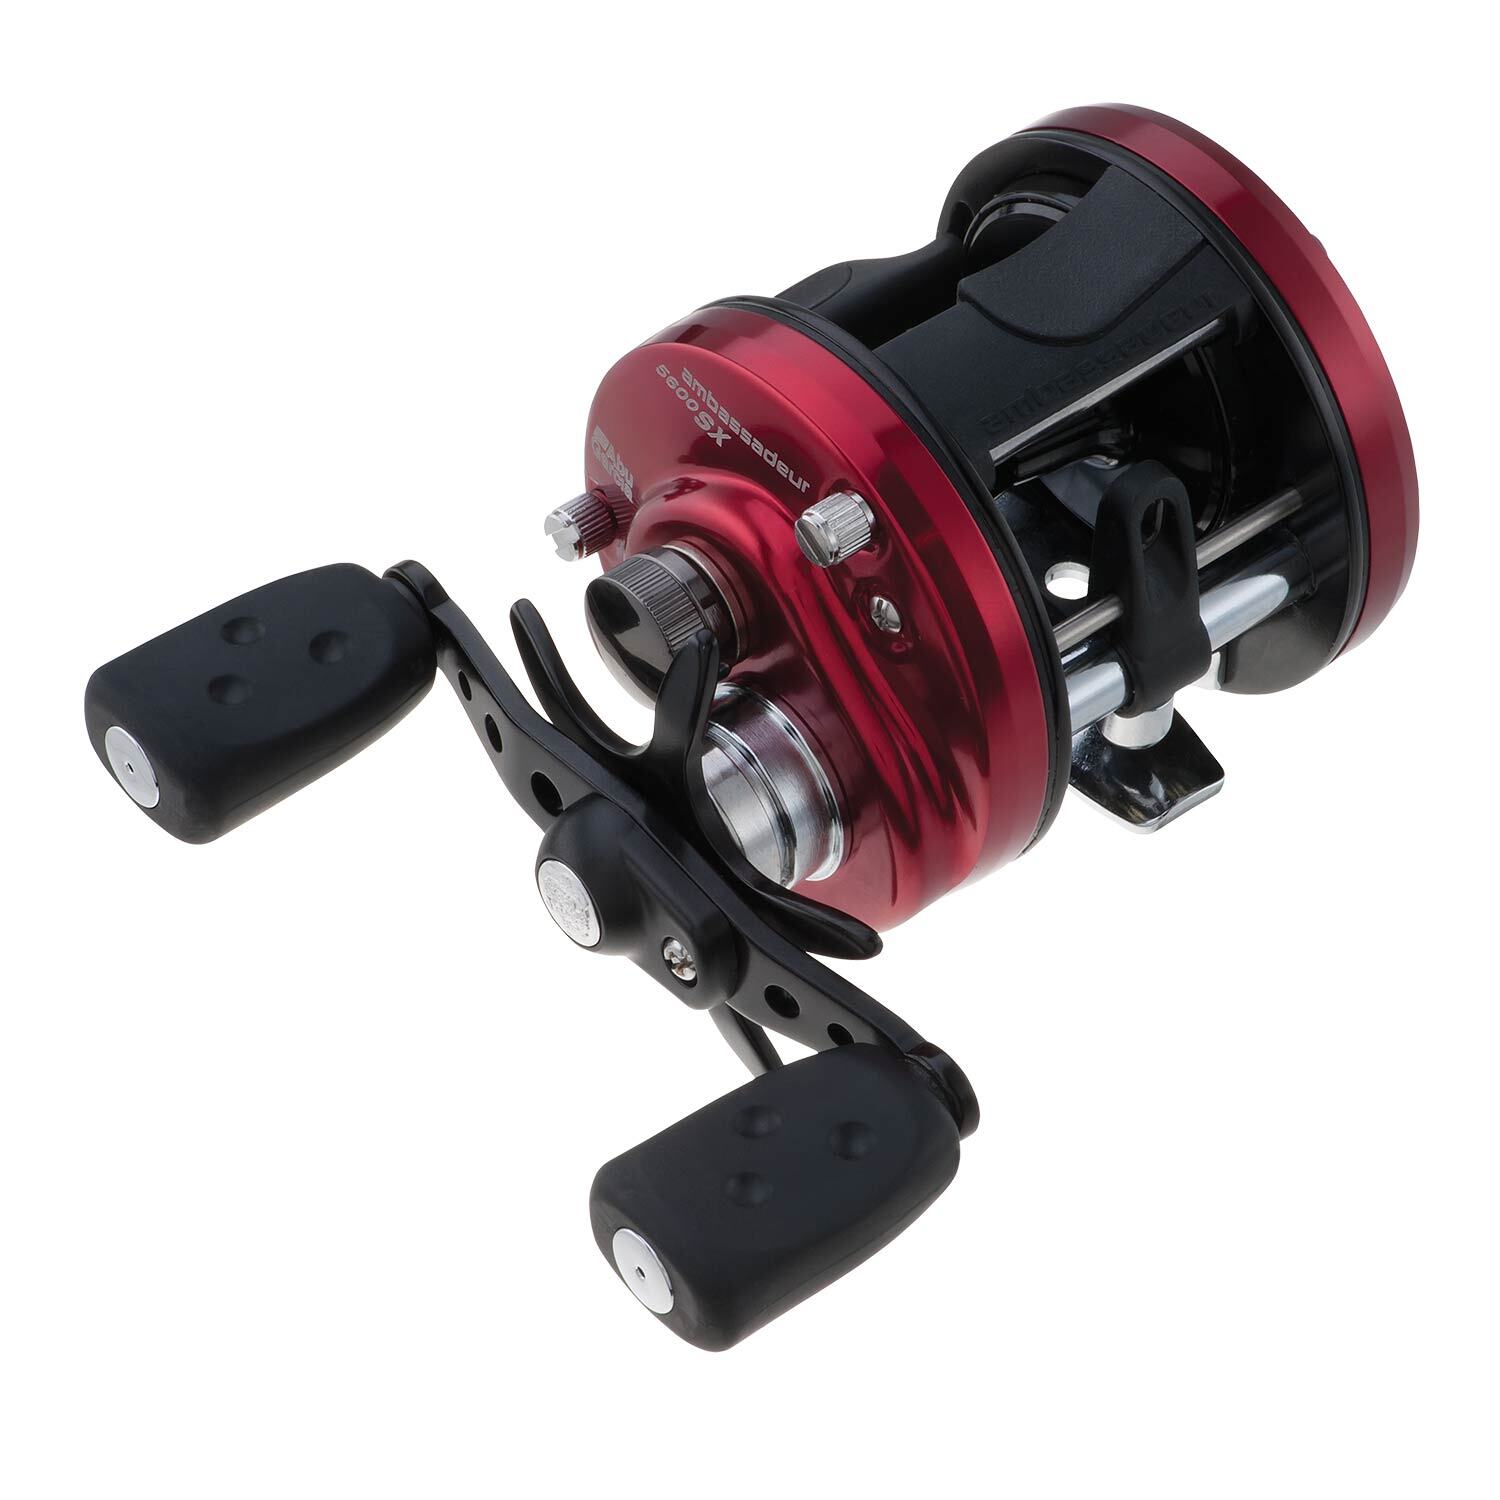 How To Correctly Oil A Bastcast Reel 